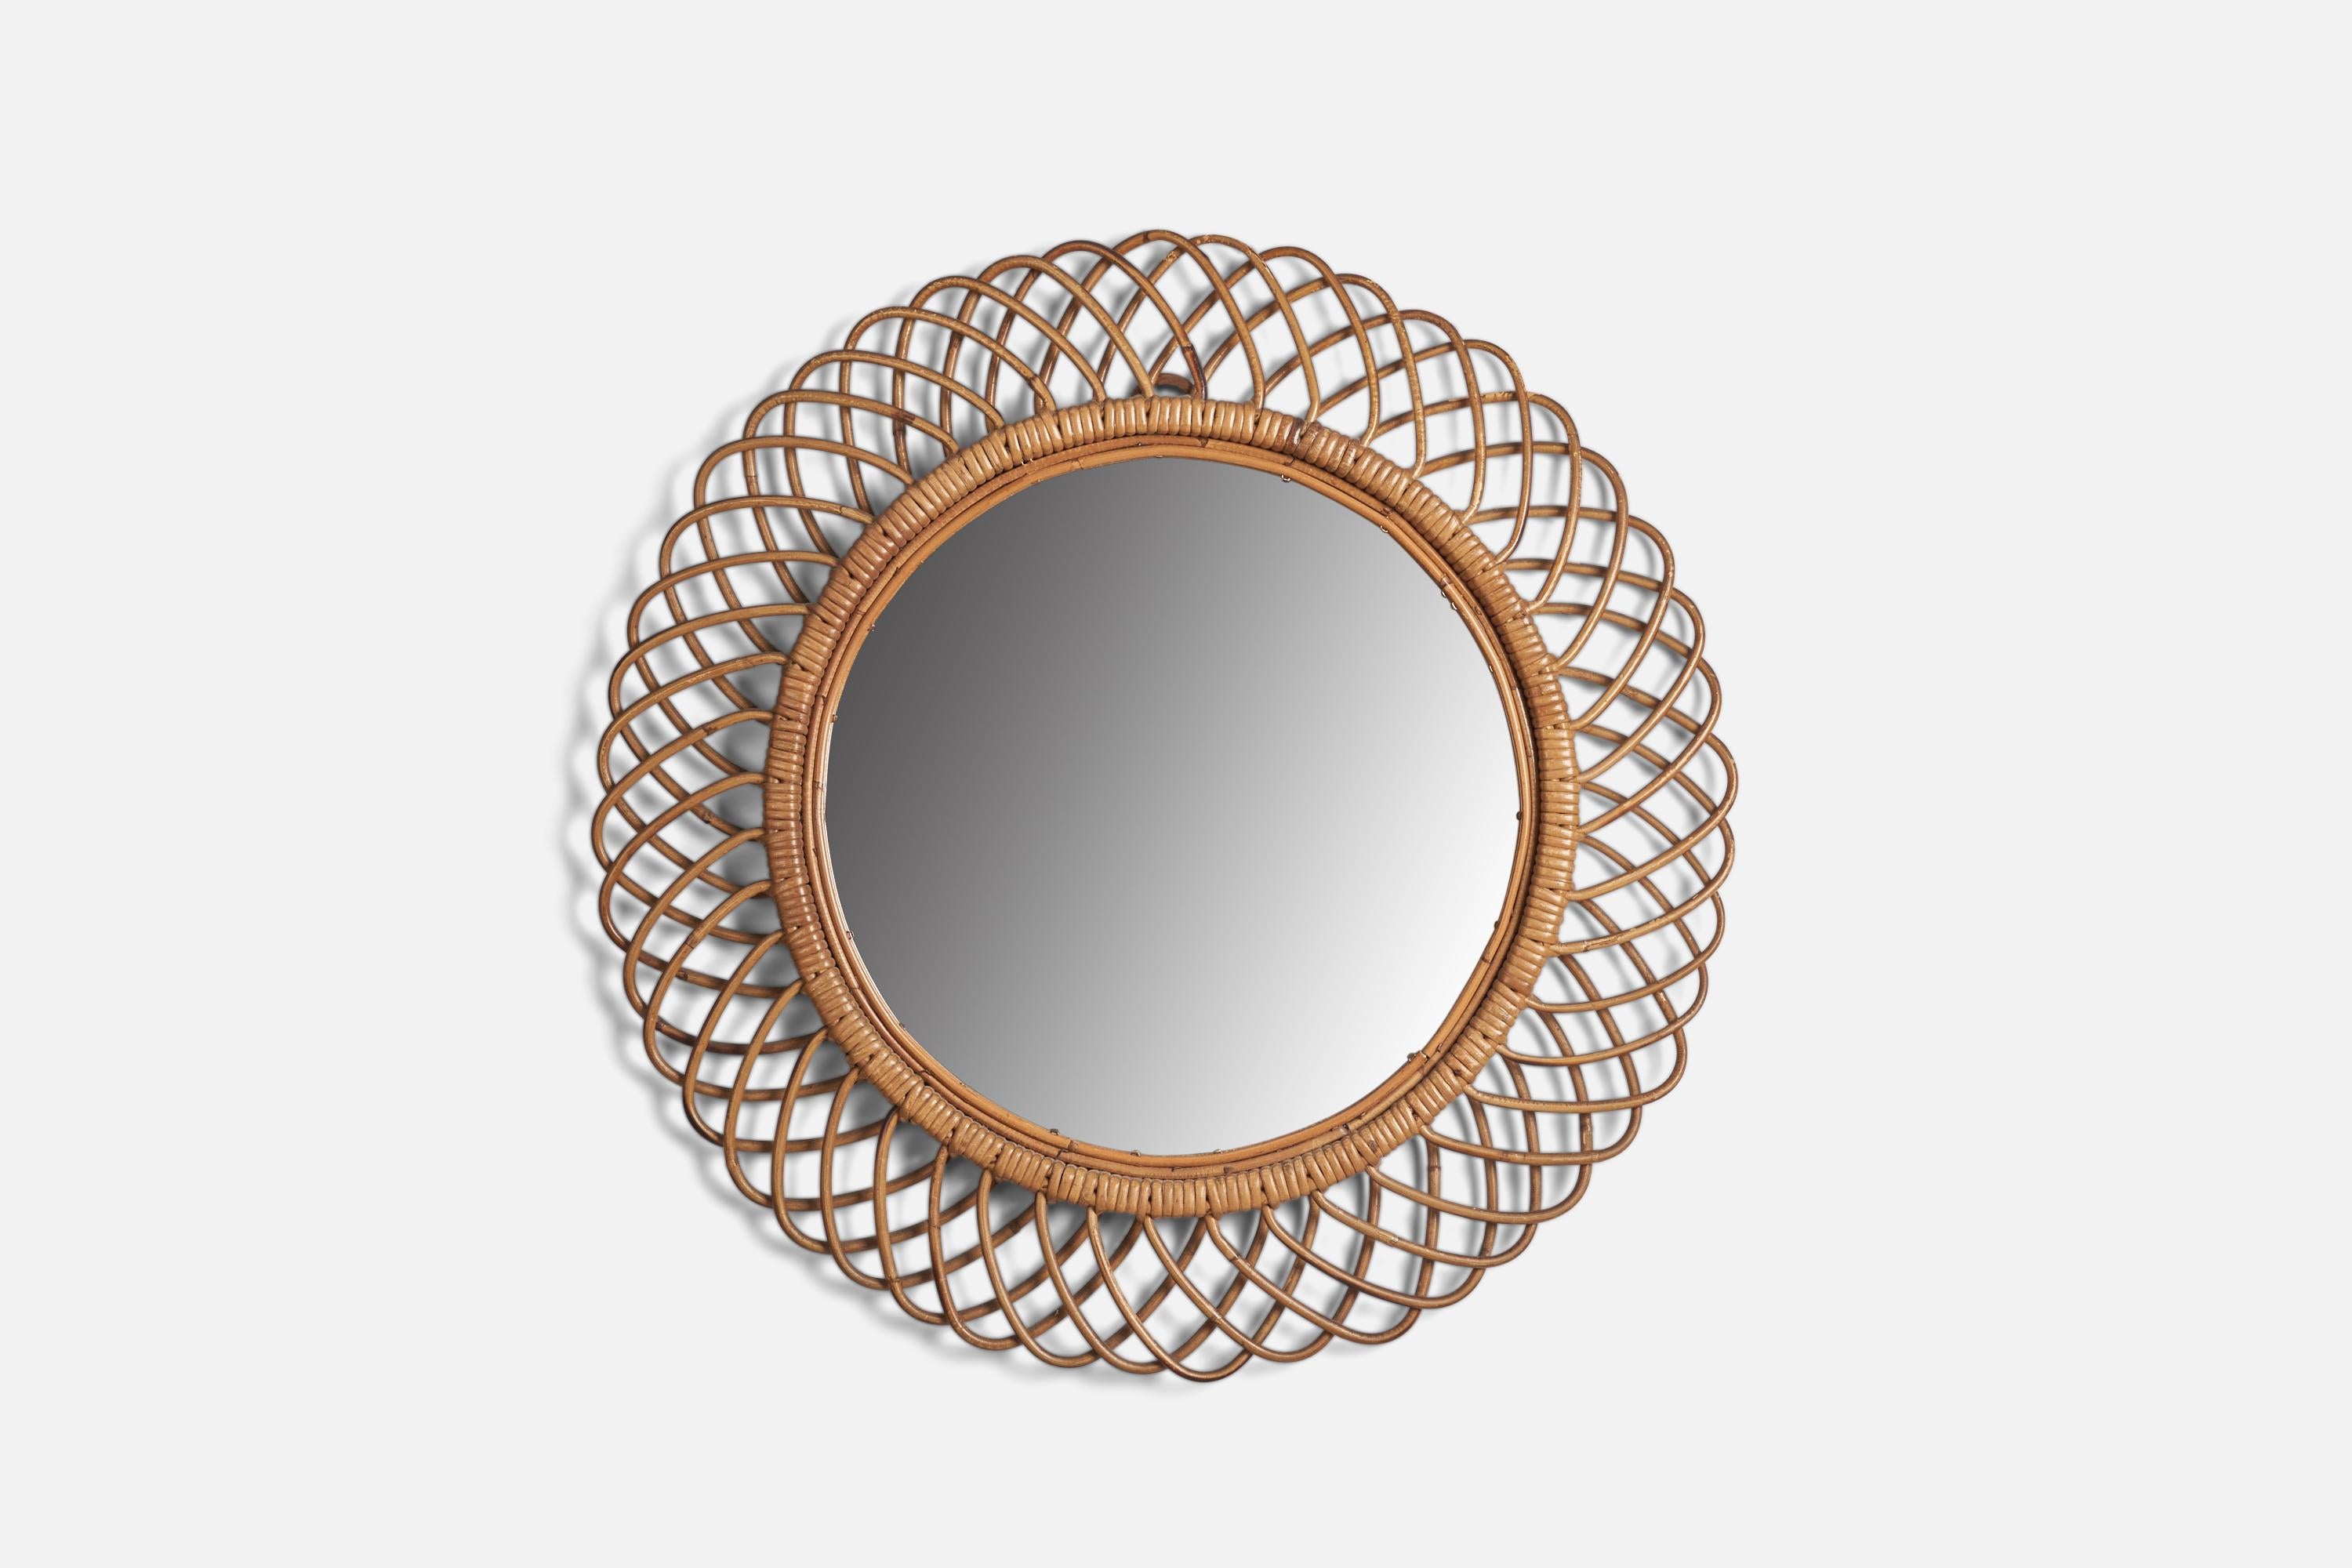 A rattan wall mirror designed and produced by an Italian Designer, Italy, 1960s.